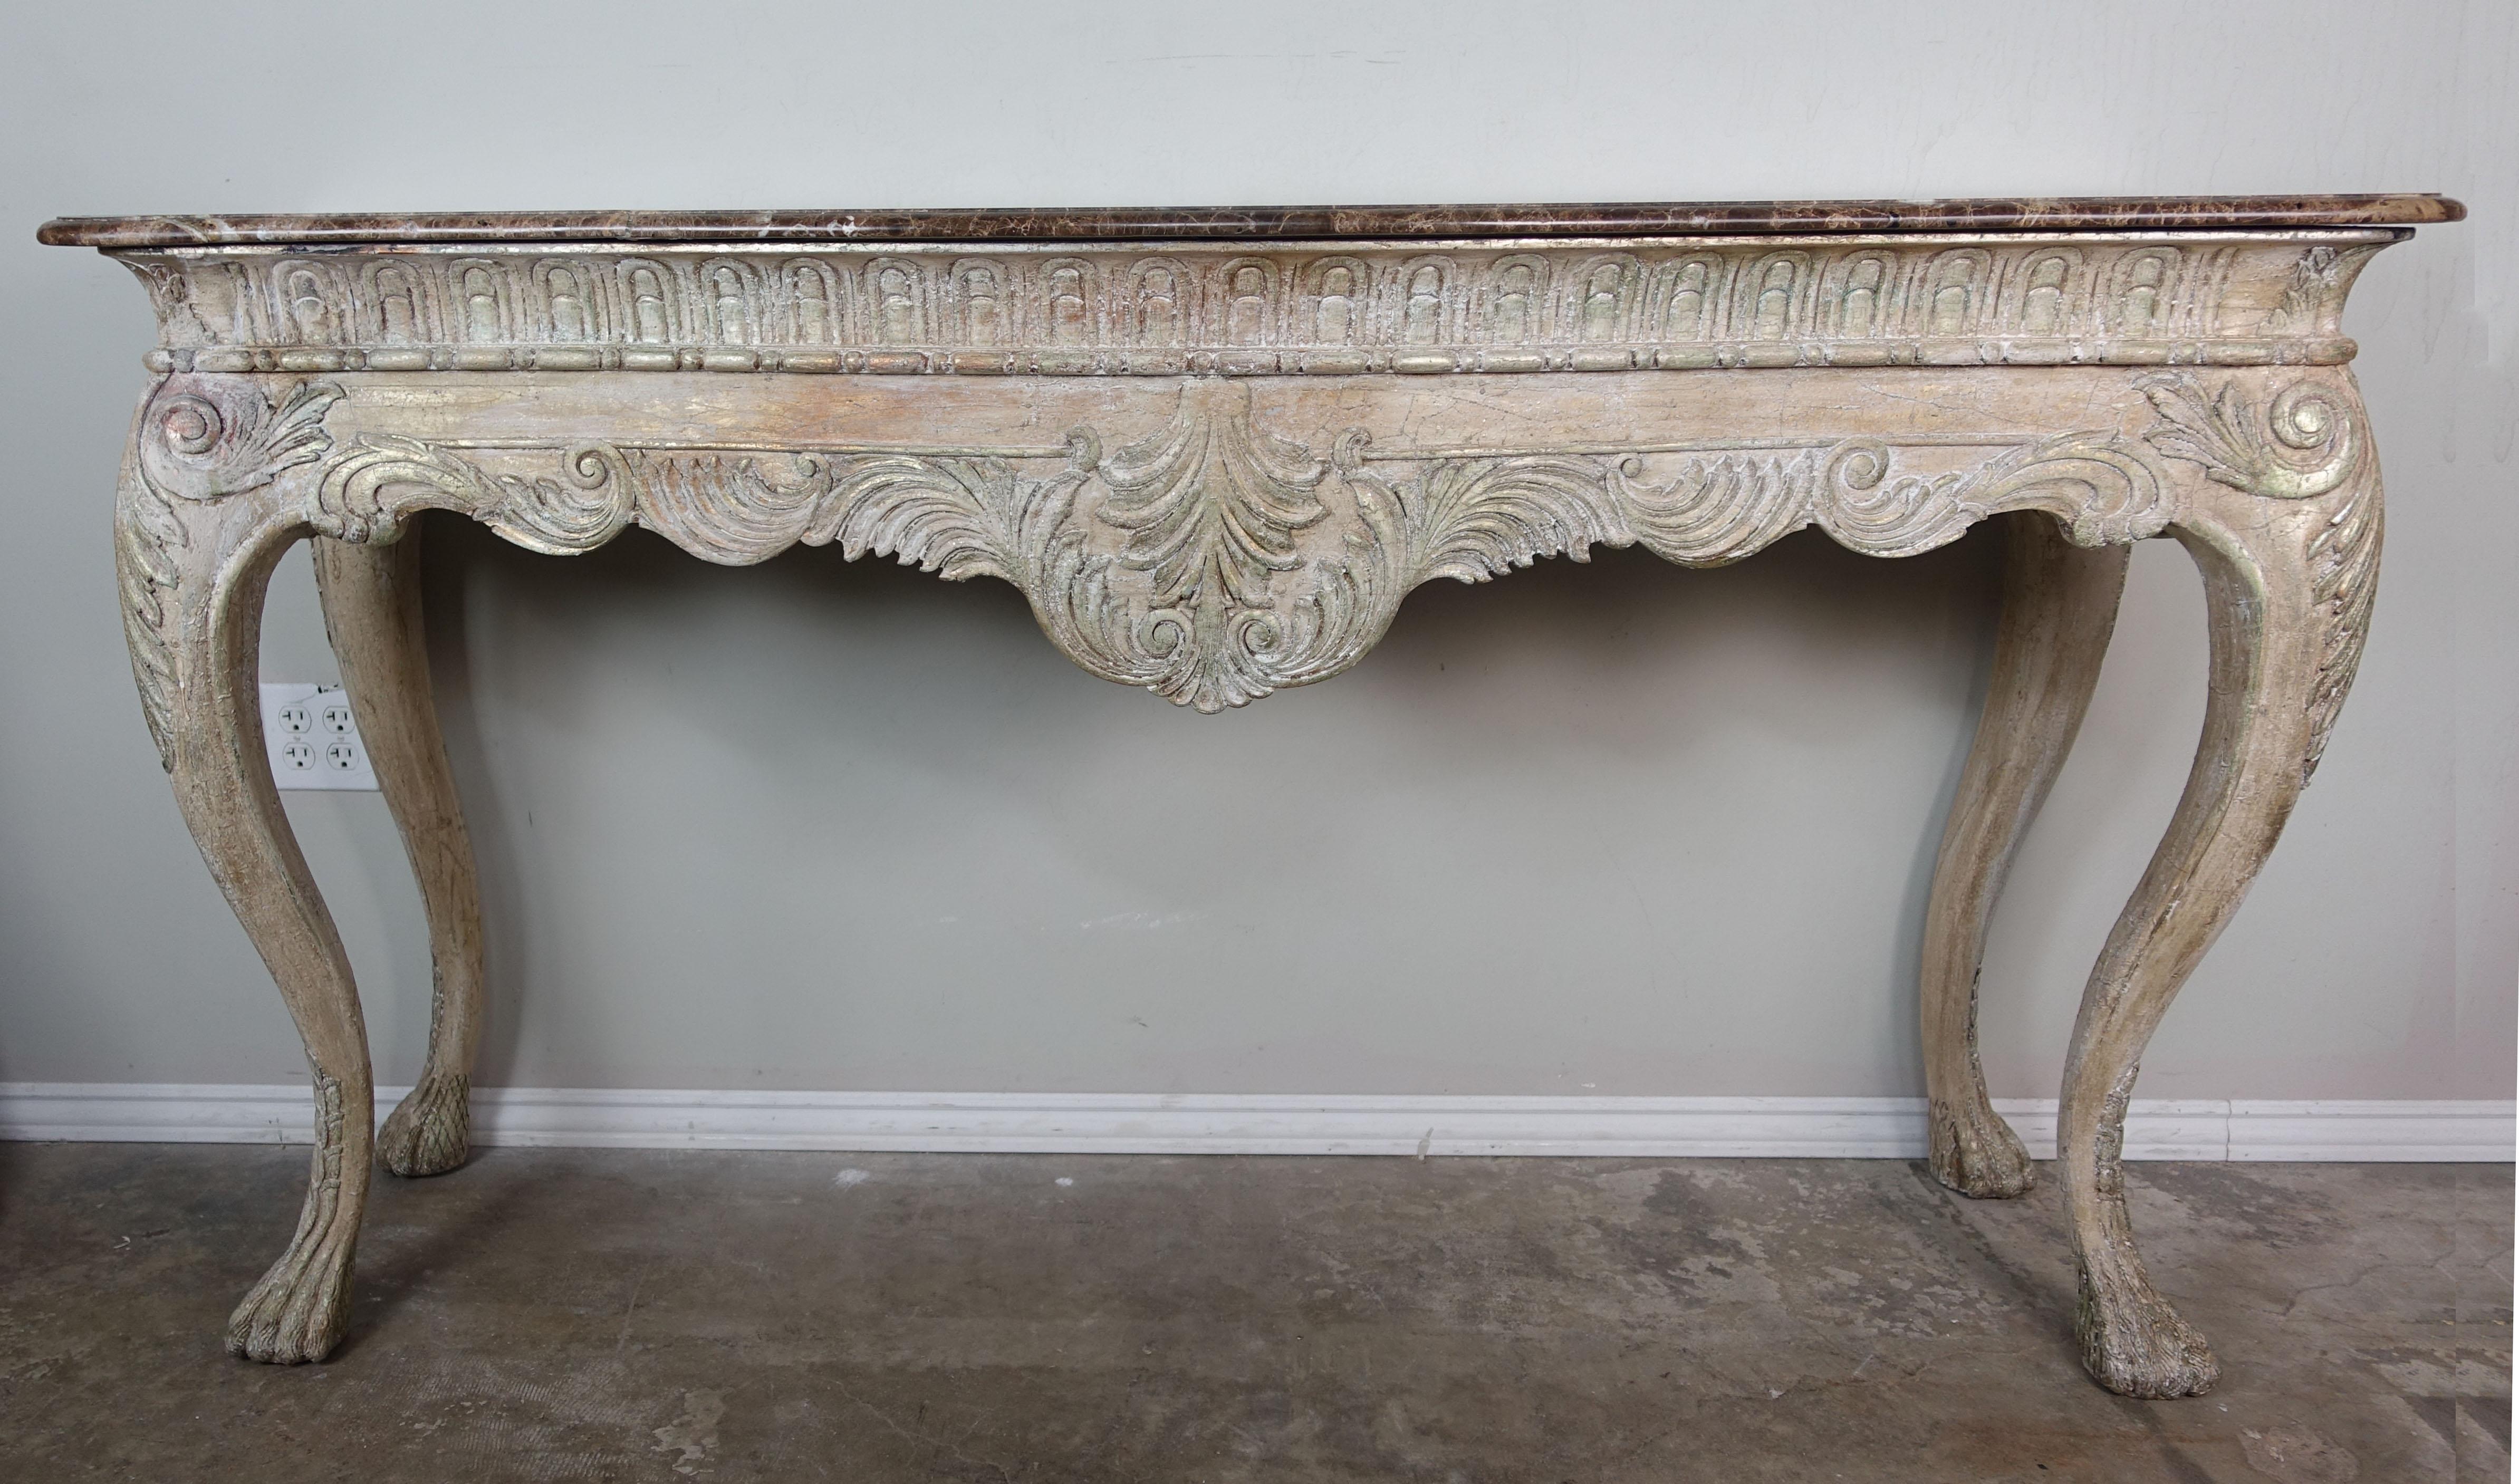 French carved Louis XV style console standing on four cabriole legs ending in paw shaped feet. Beautiful worn 